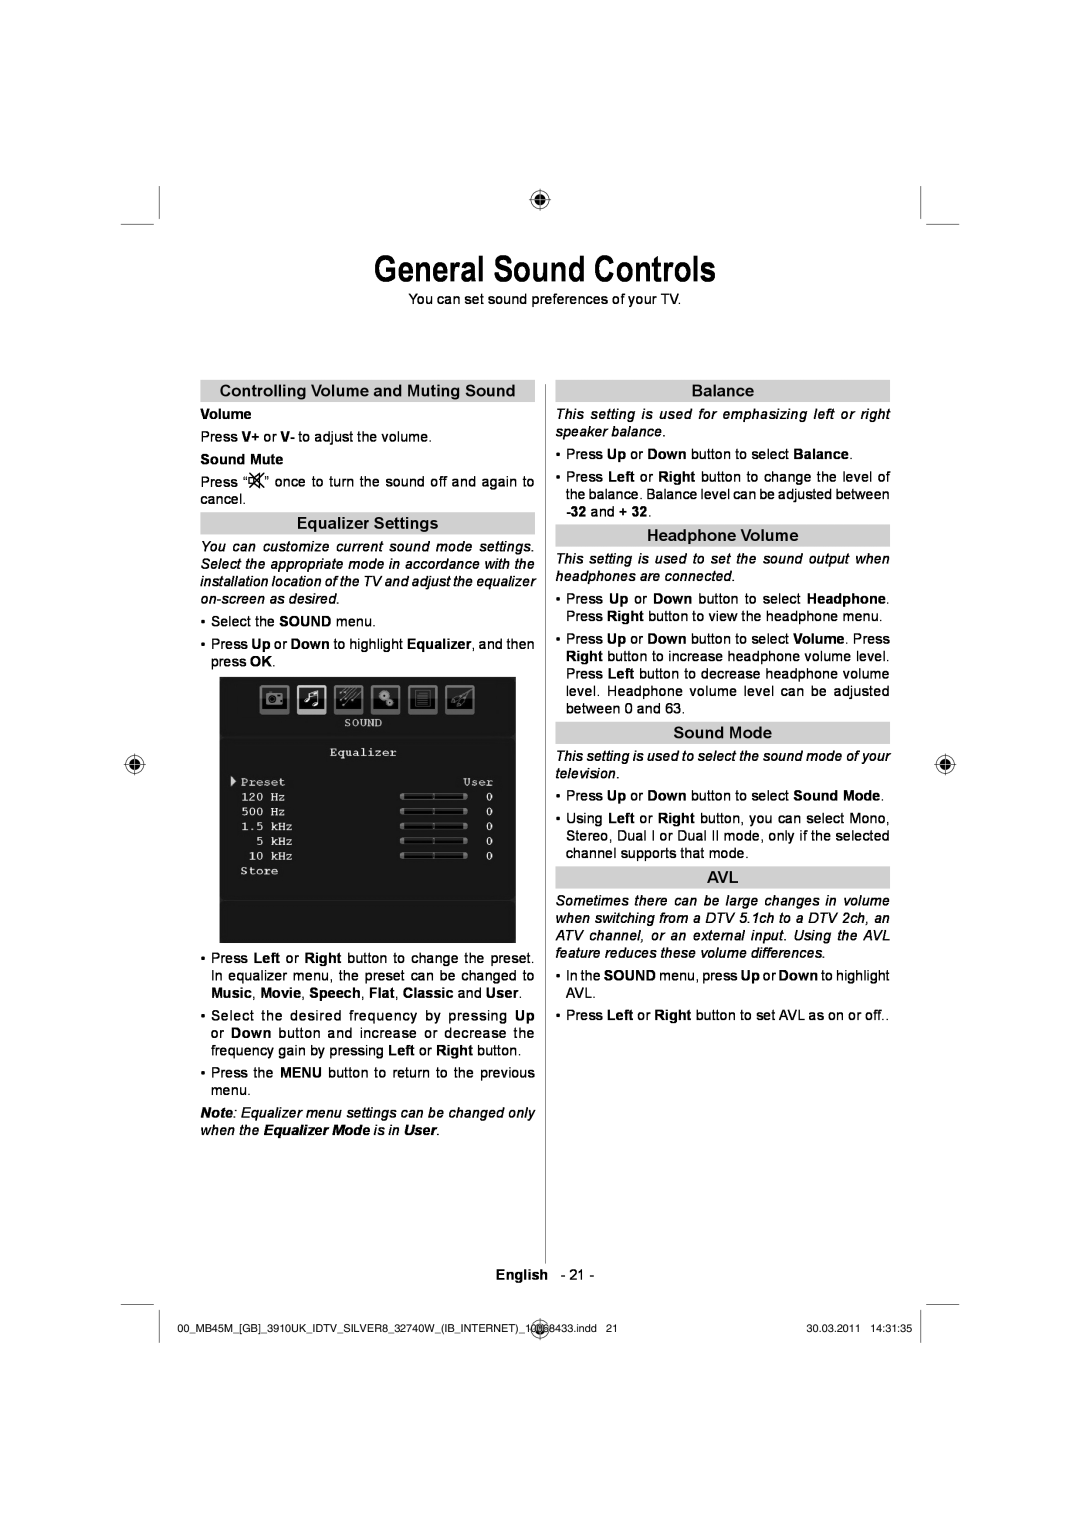 Toshiba 32BV500B General Sound Controls, Controlling Volume and Muting Sound, Equalizer Settings, Balance, Sound Mode 